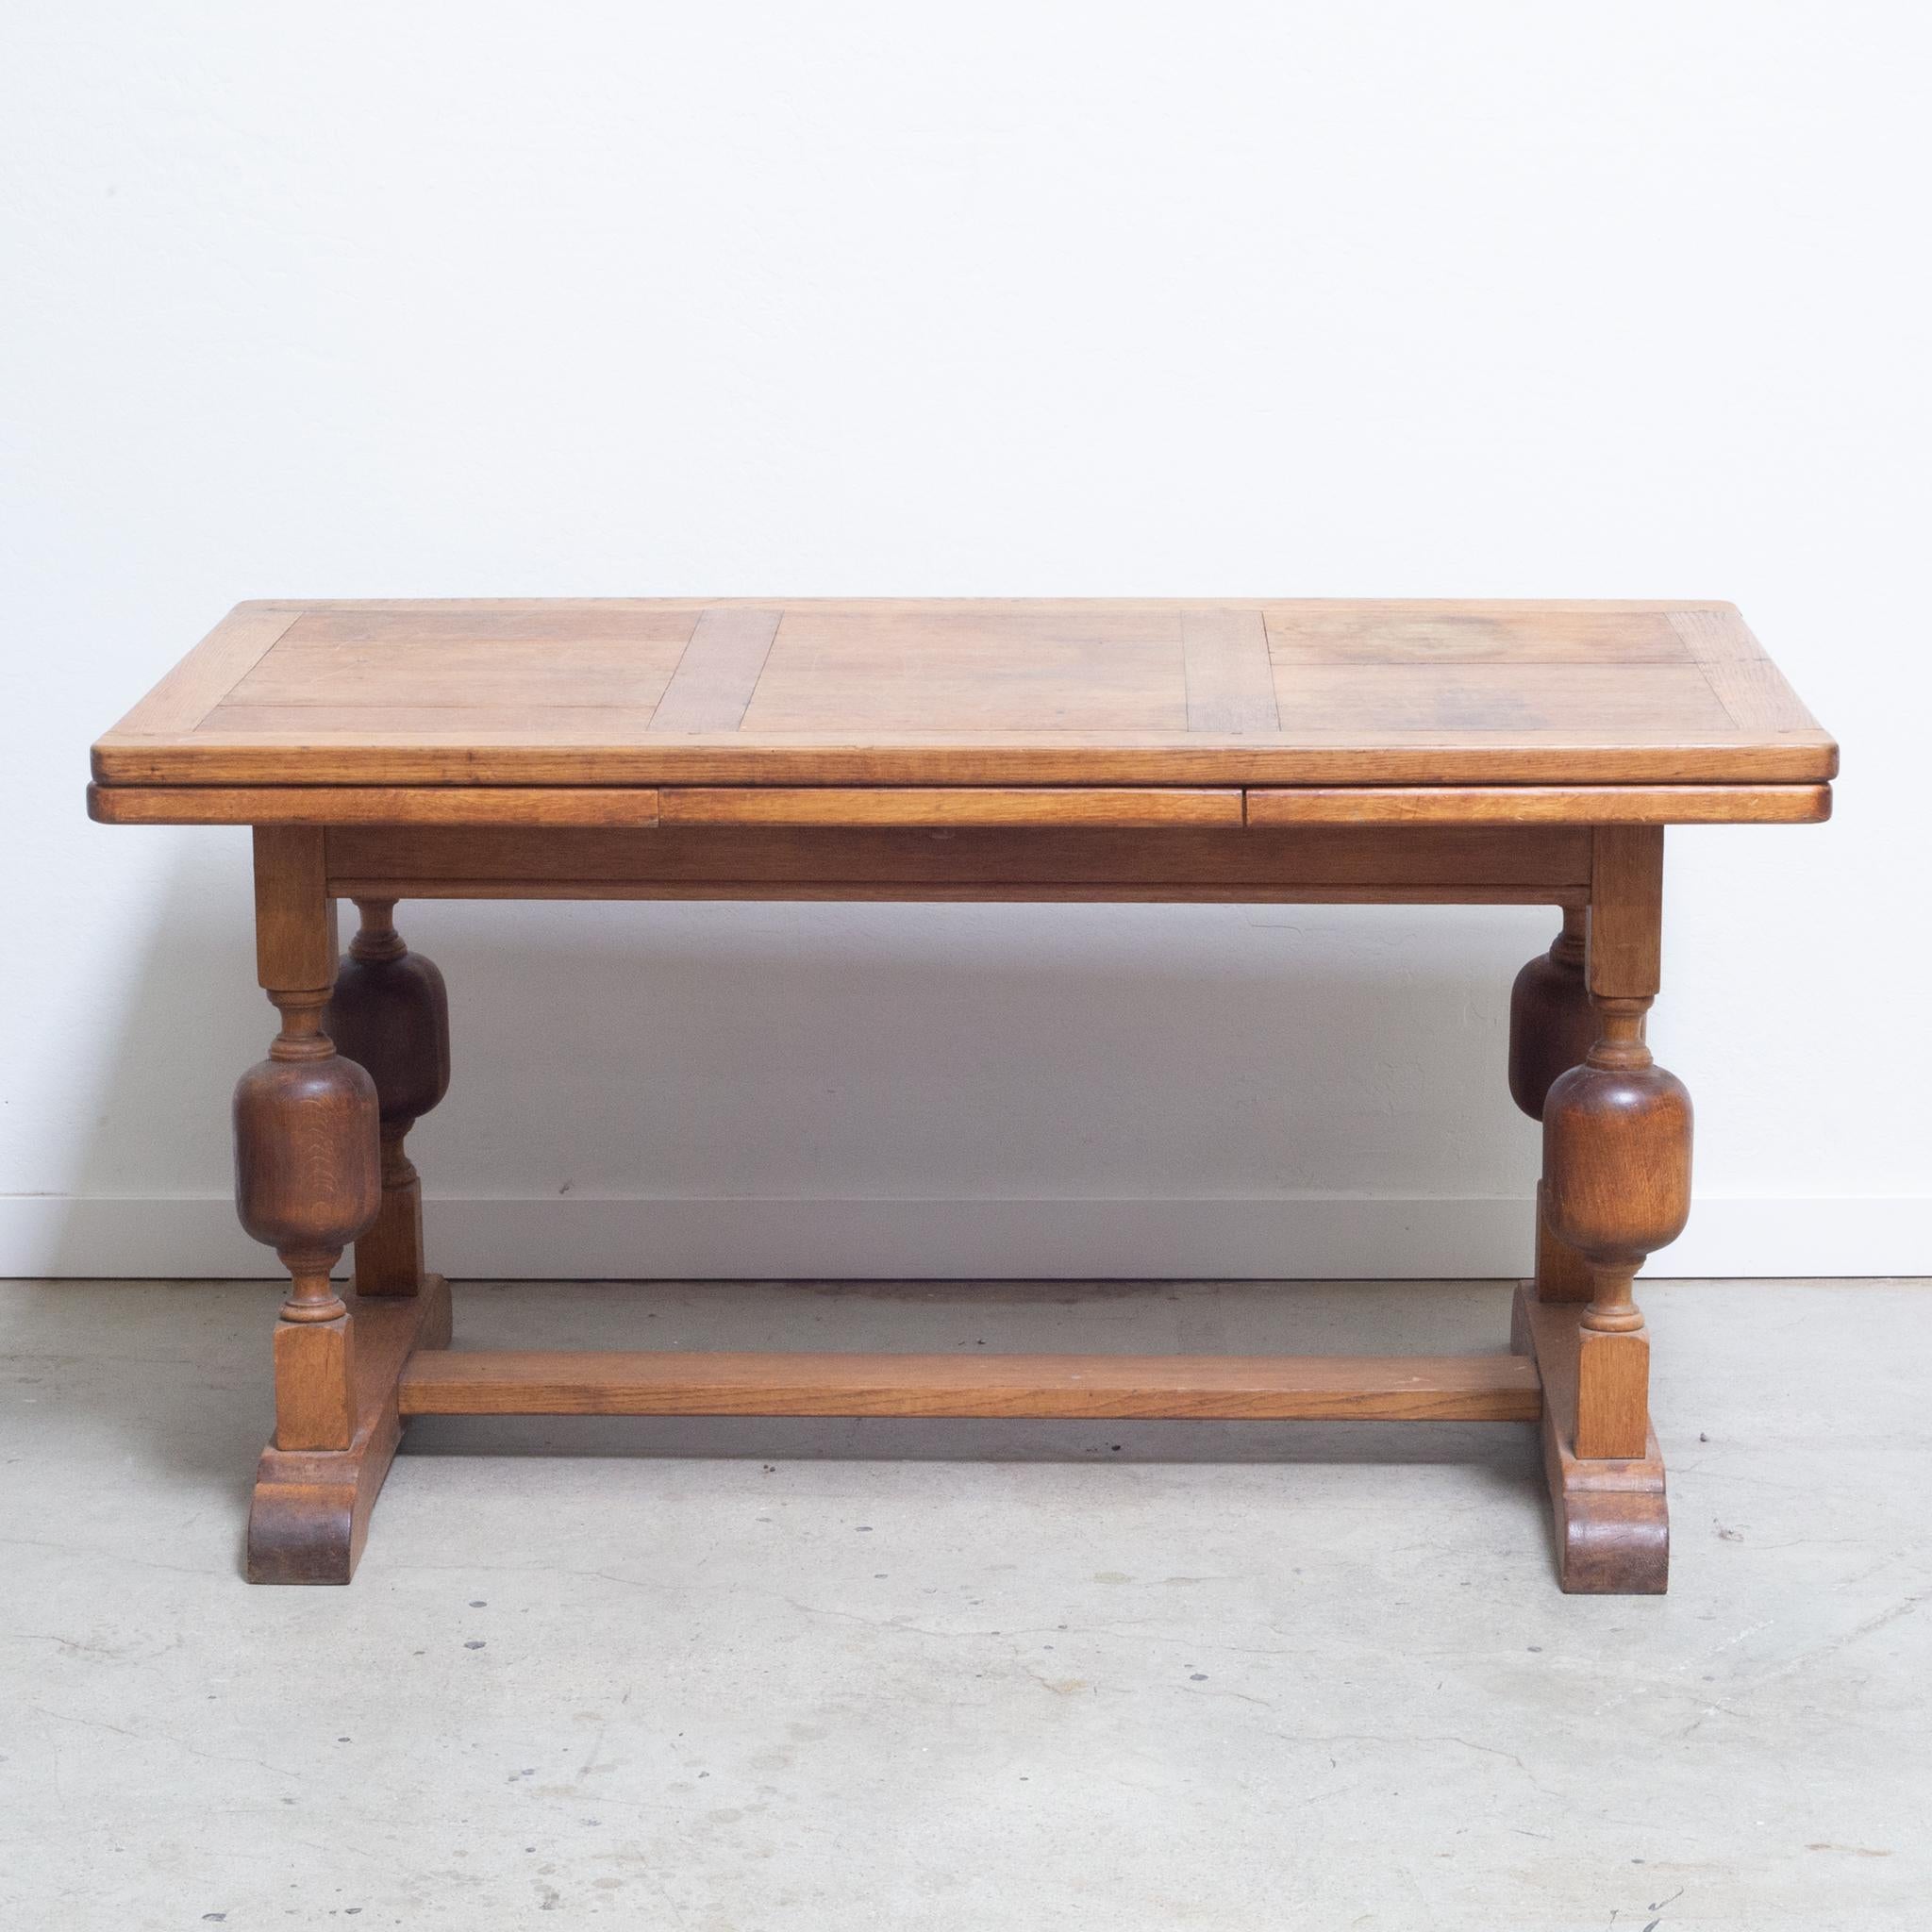 Rustic 19th C. French Provincial Oak Draw-Leaf Dining Table c.1850-1890